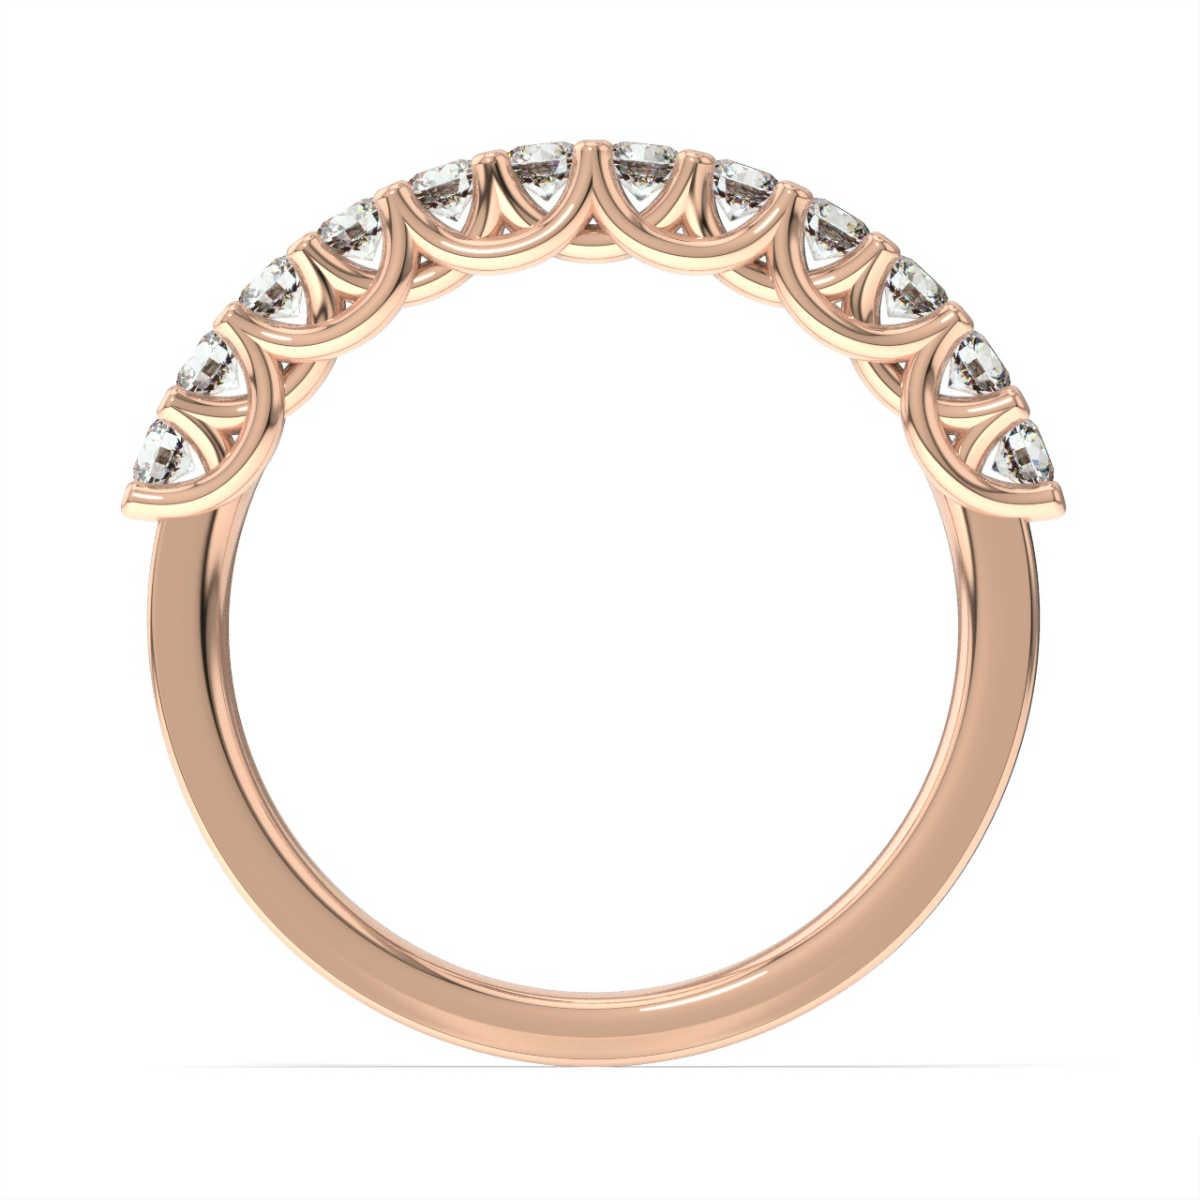 This stunning weave ring features 12 perfectly matched round brilliant diamonds. Experience the difference!

Product details: 

Center Gemstone Color: WHITE
Side Gemstone Type: NATURAL DIAMOND
Side Gemstone Shape: ROUND
Metal: 18K Rose Gold
Metal